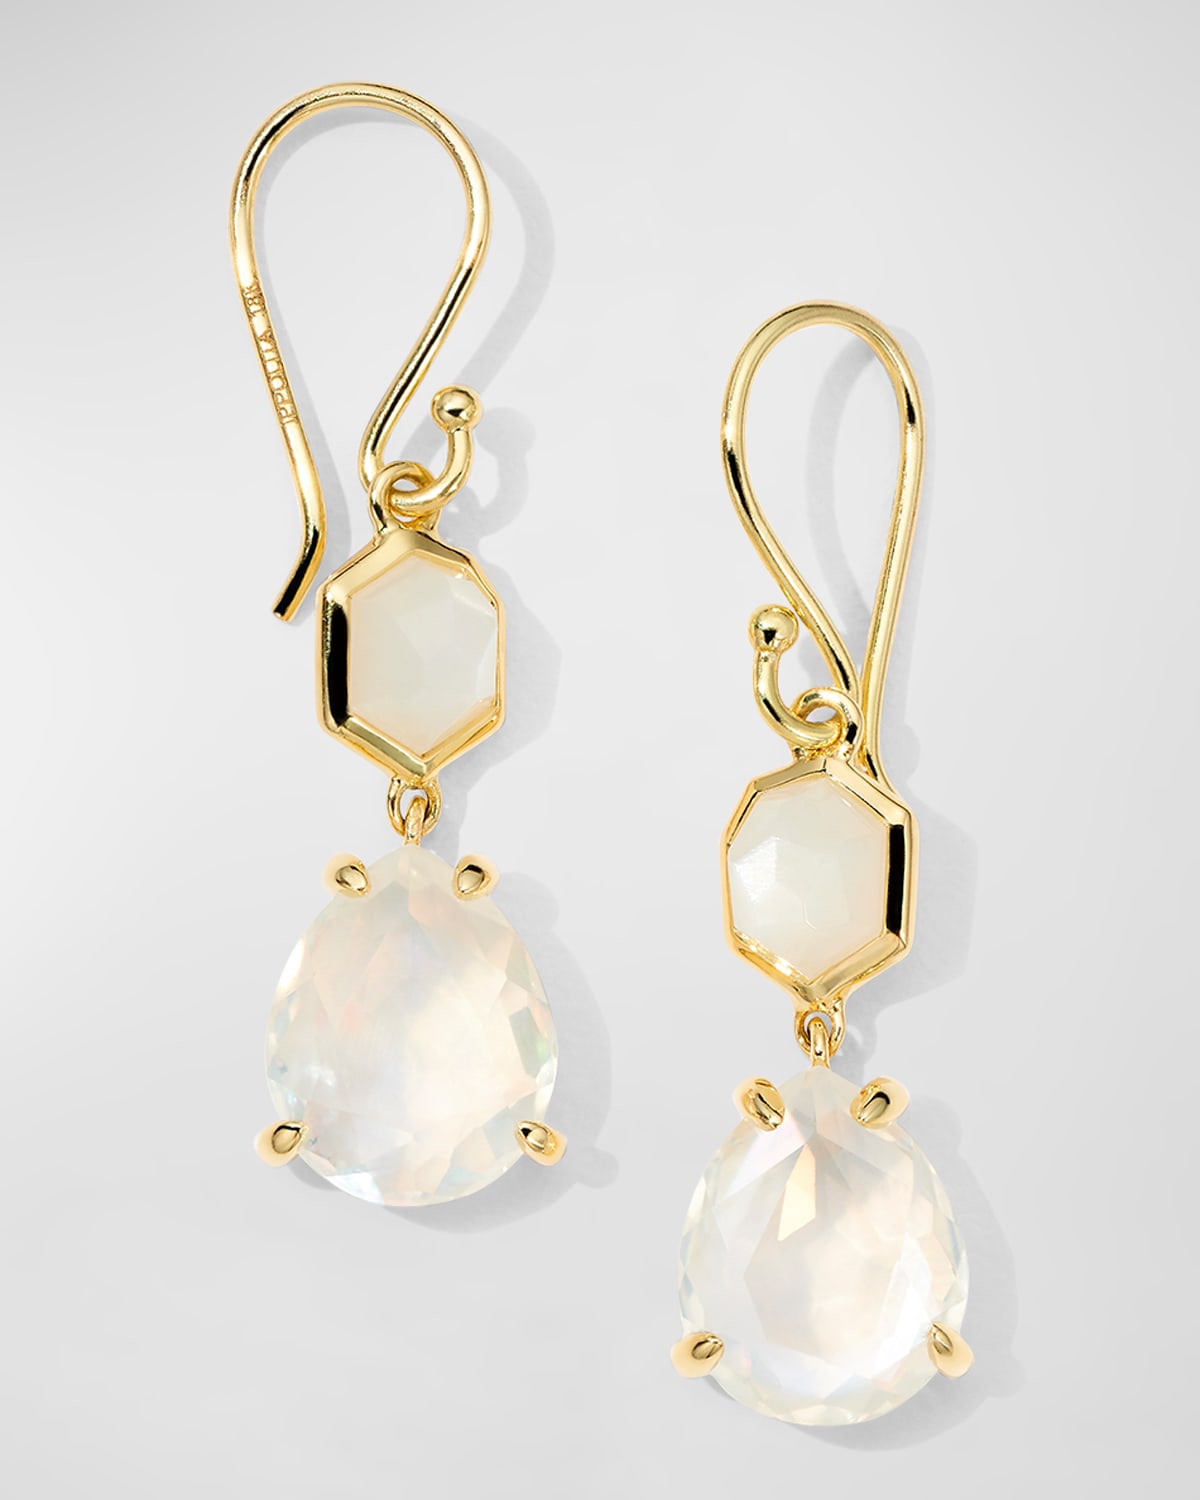 IPPOLITA 18K GOLD ROCK CANDY SMALL SNOWMAN EARRINGS IN WHITE MOONSTONE ROCK CRYSTAL MOP AND ROCK CRYSTAL TRIP